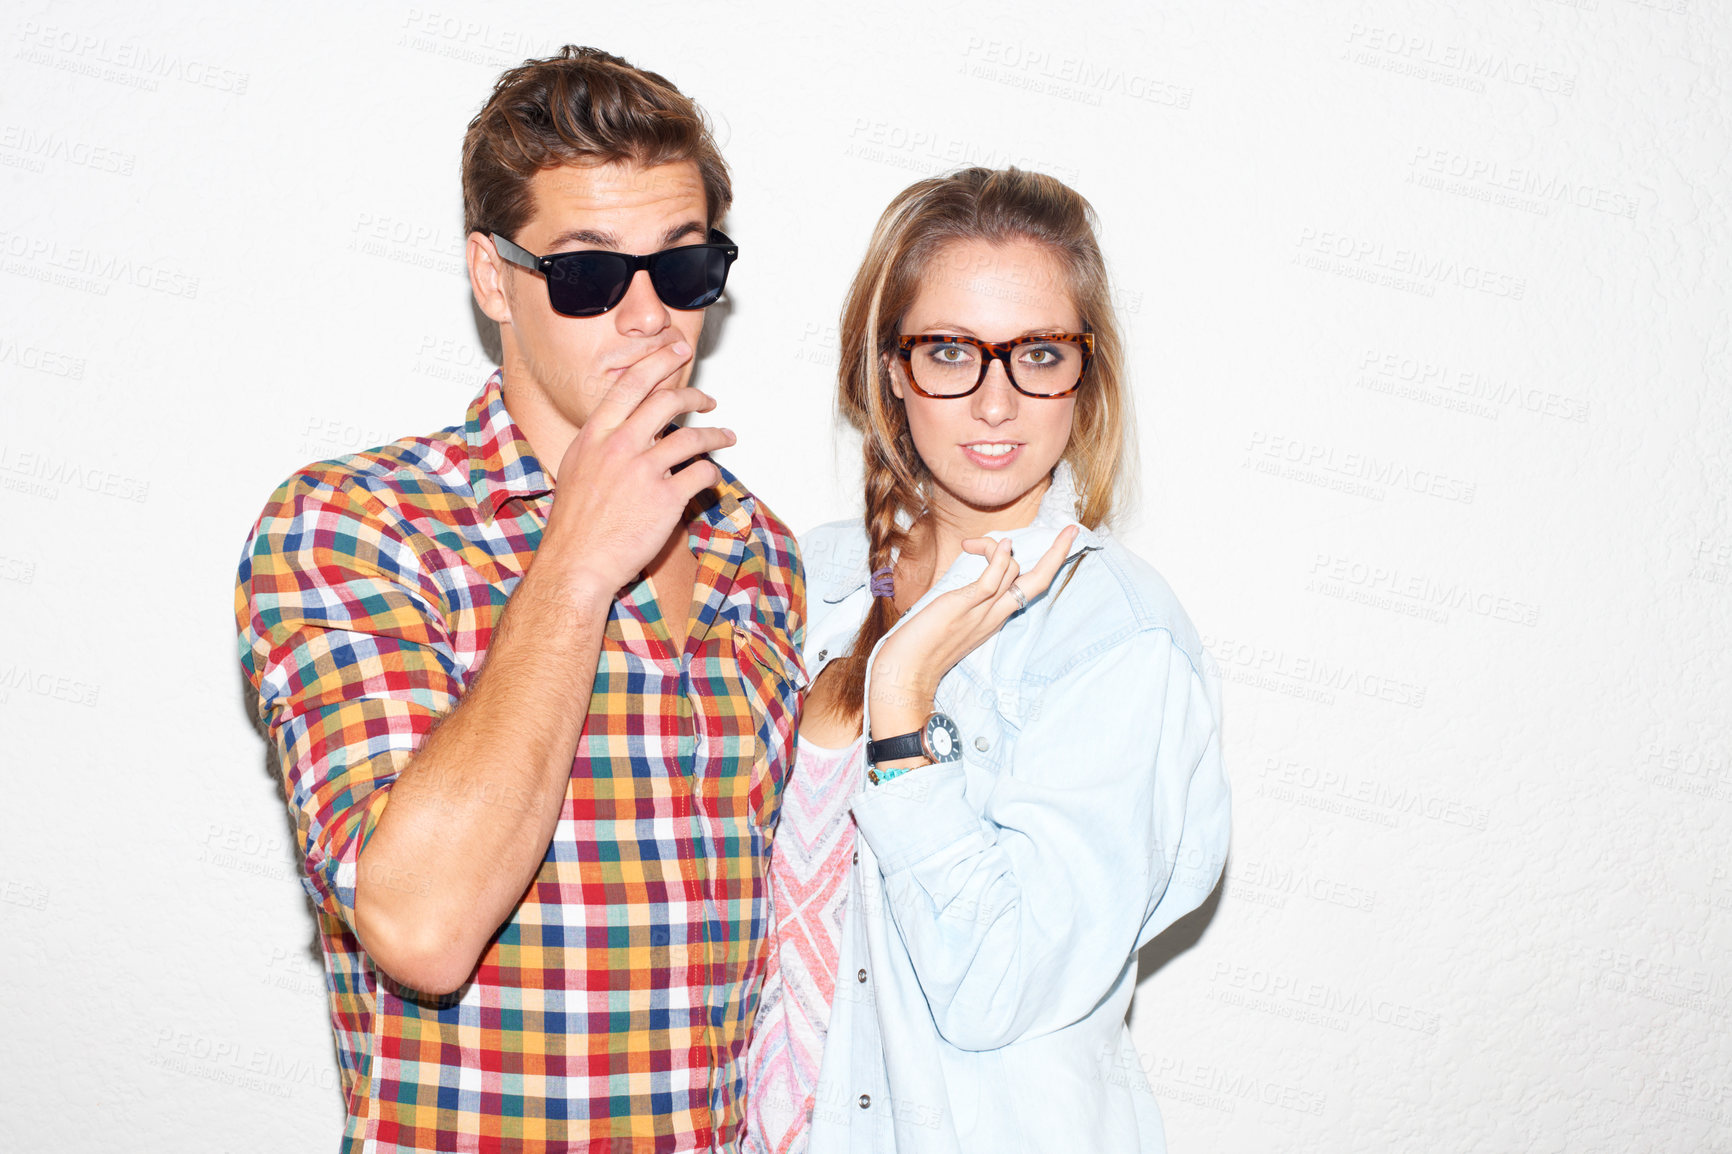 Buy stock photo Portrait of cool couple at party, sunglasses on face and gen z fashion with university culture in youth. Nerd students, woman and man in crazy picture at college, hipster people on wall background.